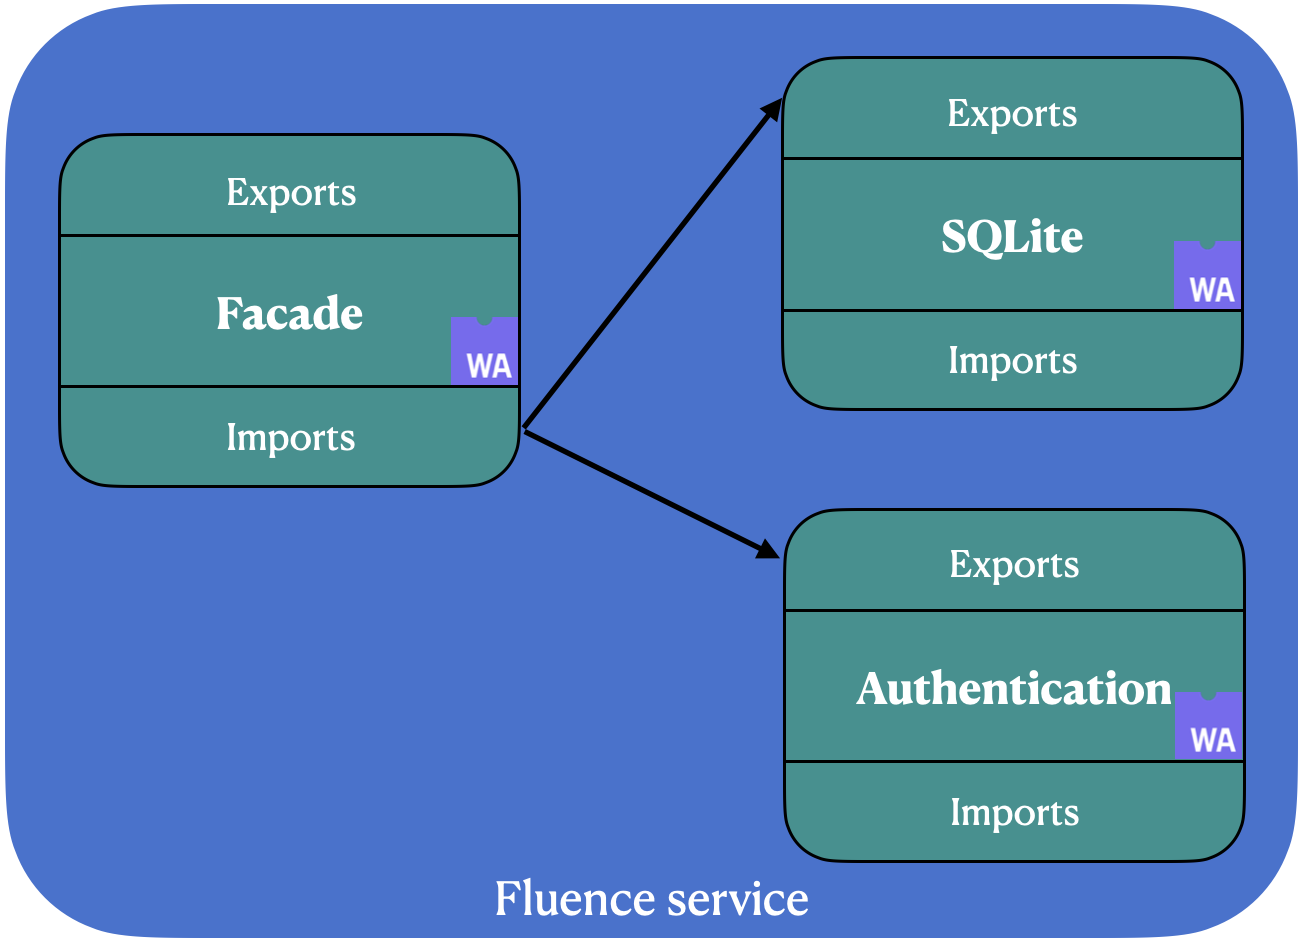 an example of Fluence service